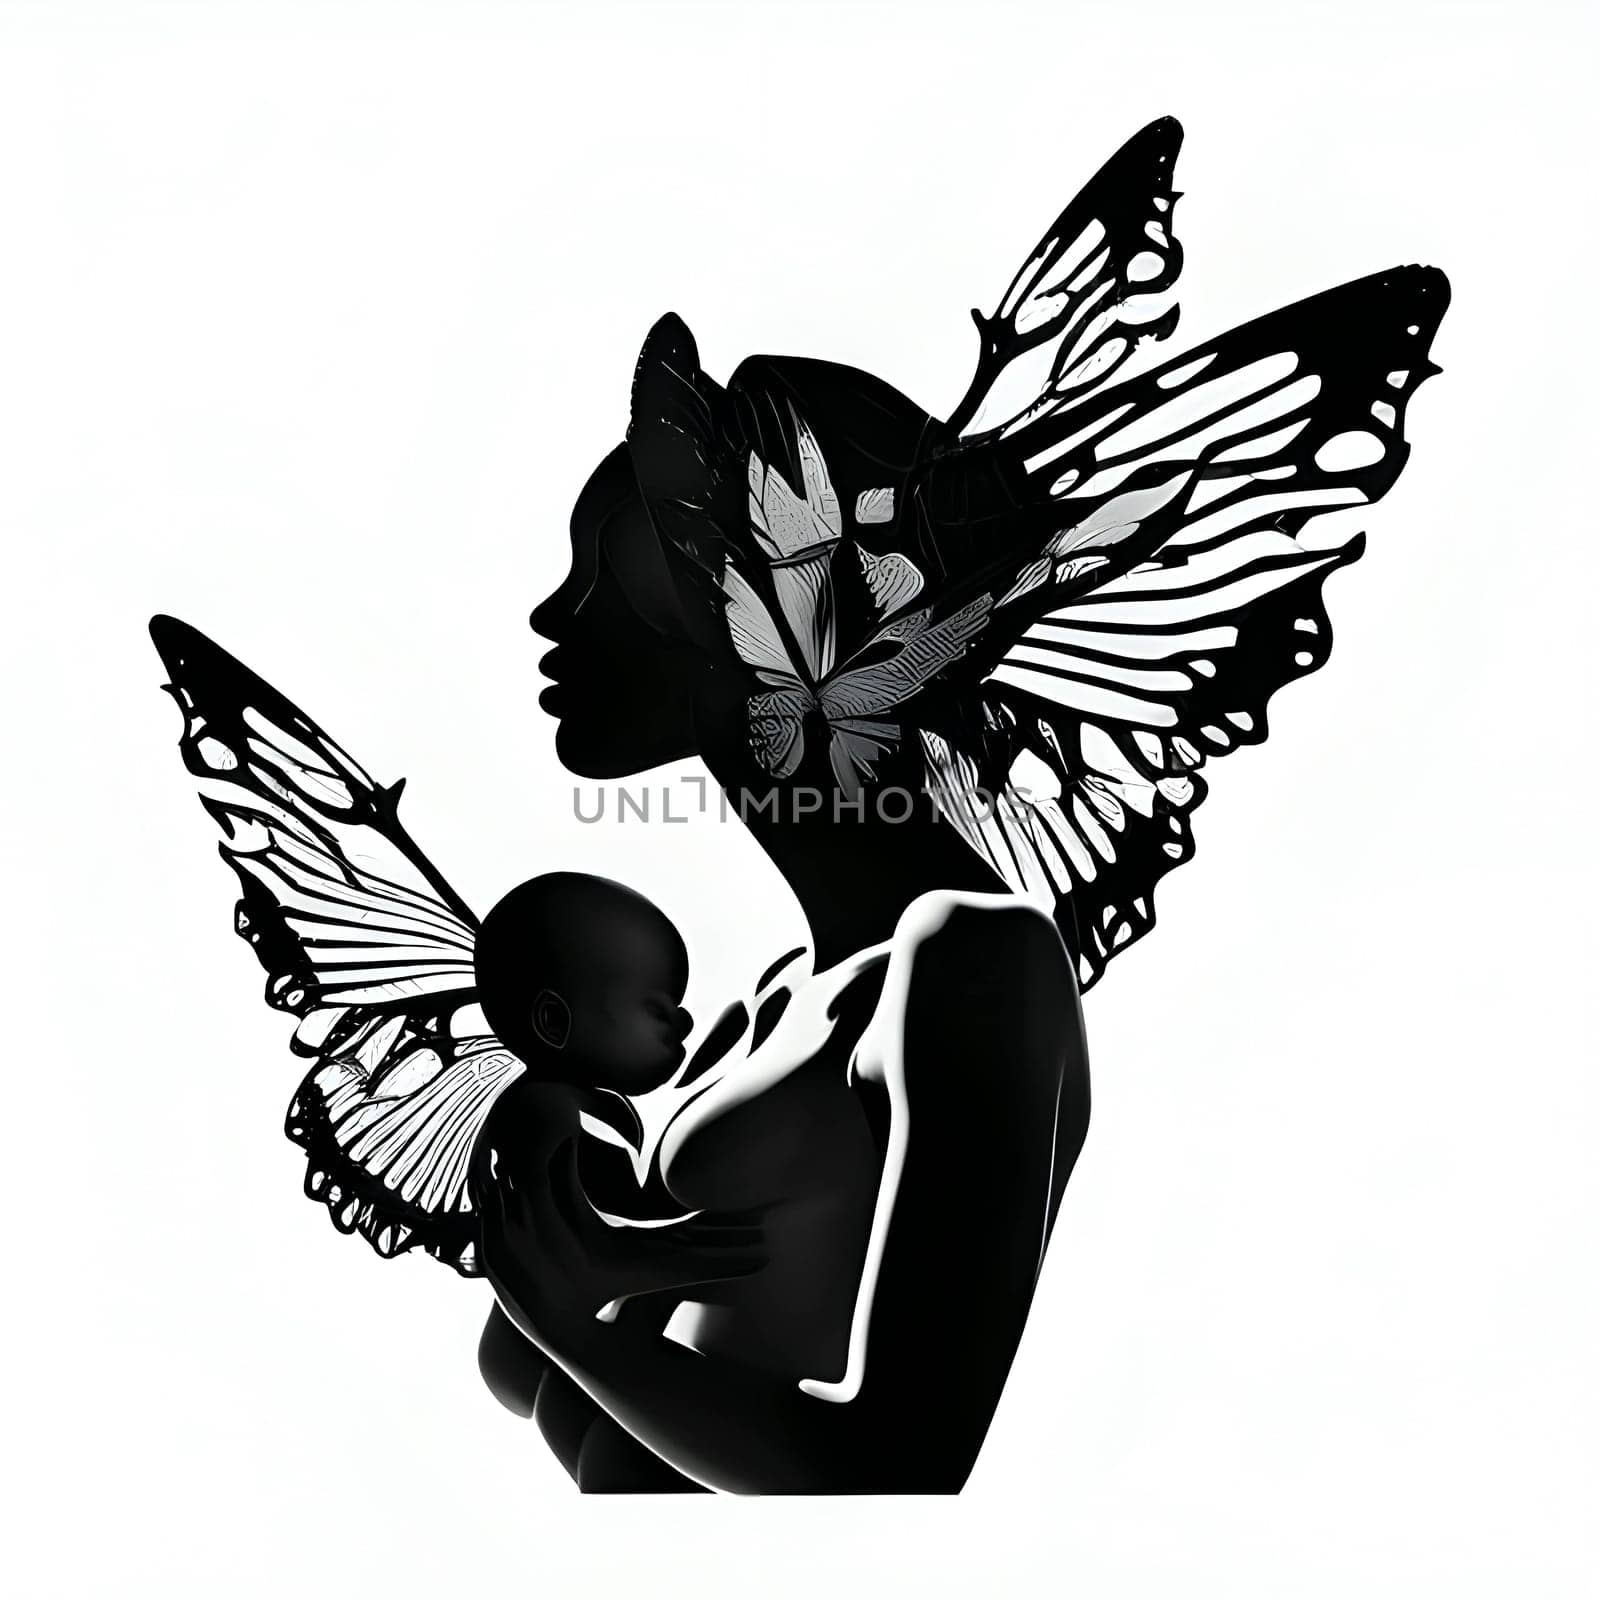 Black silhouette of a woman and baby on white background.